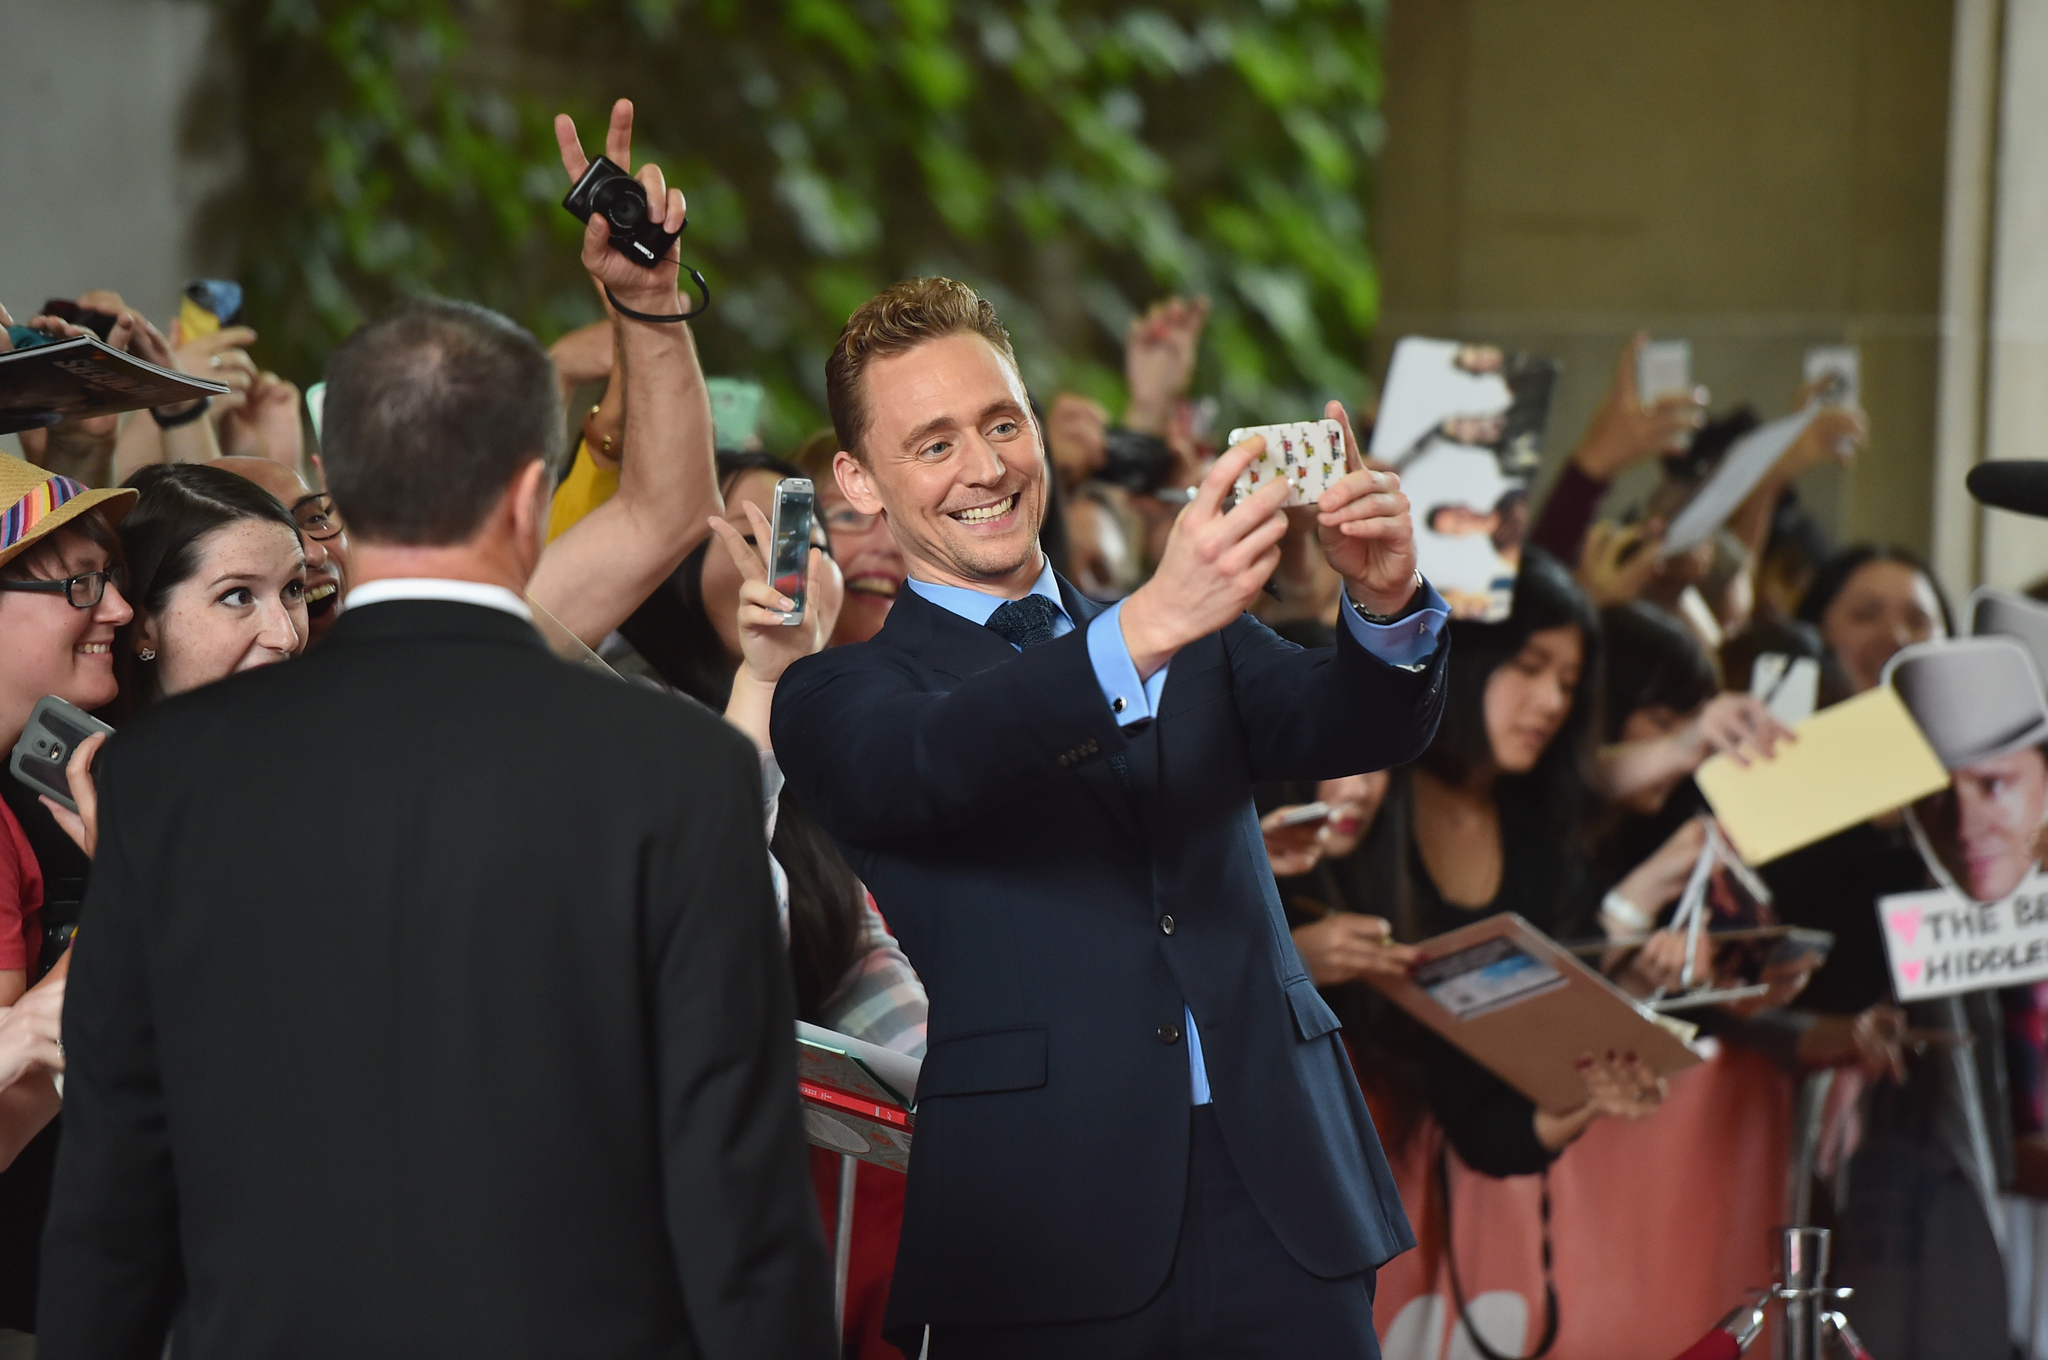 Tom Hiddleston at event of I Saw the Light (2015)